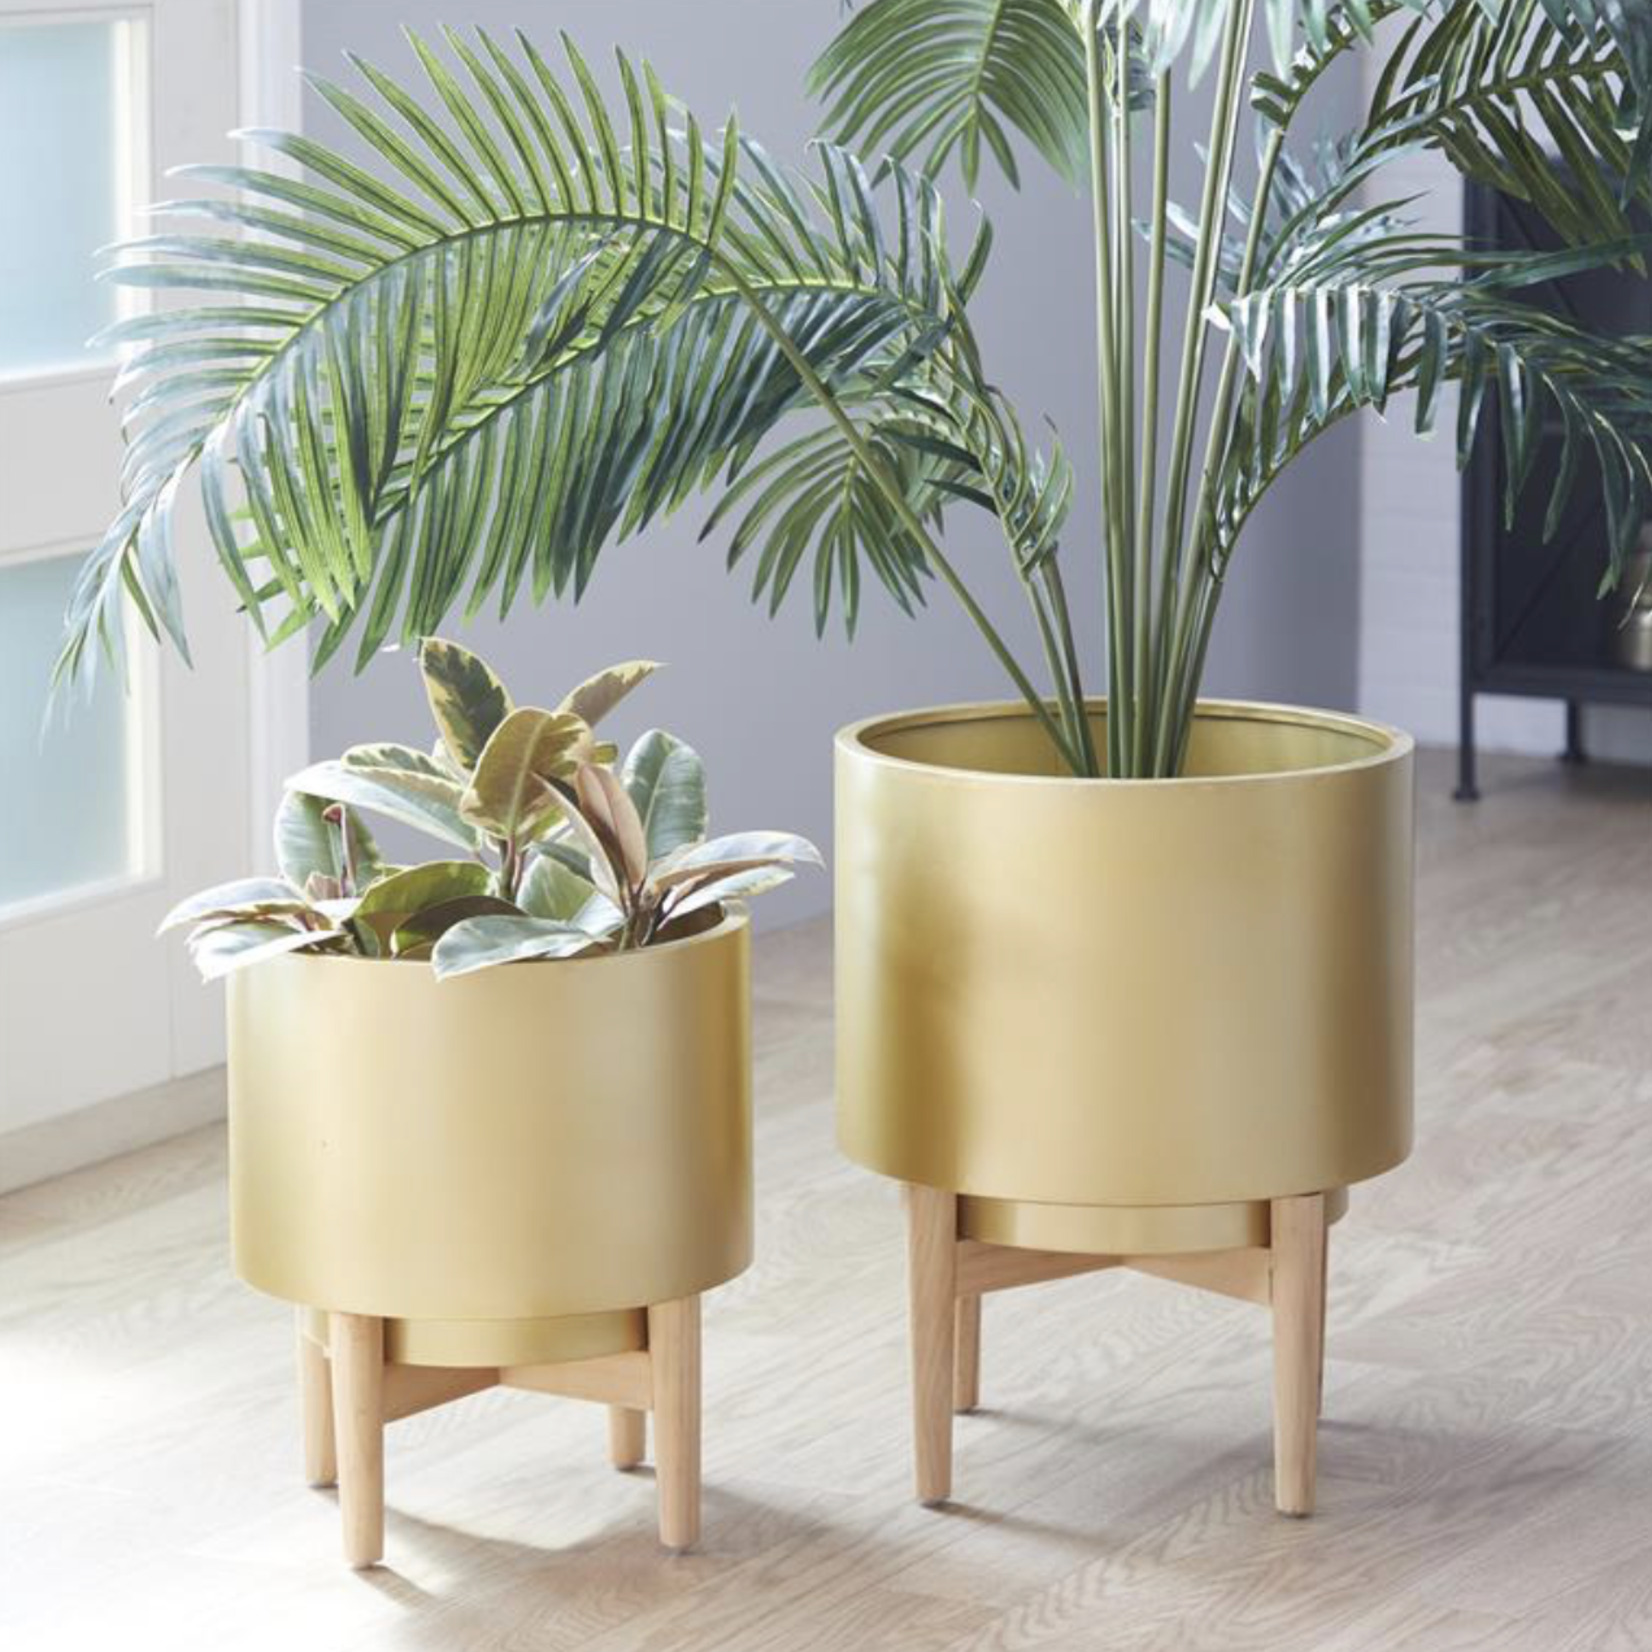 20”H X 16” LARGE GOLD METAL PLANTER WITH WOOD STAND (NOT WATER TIGHT)